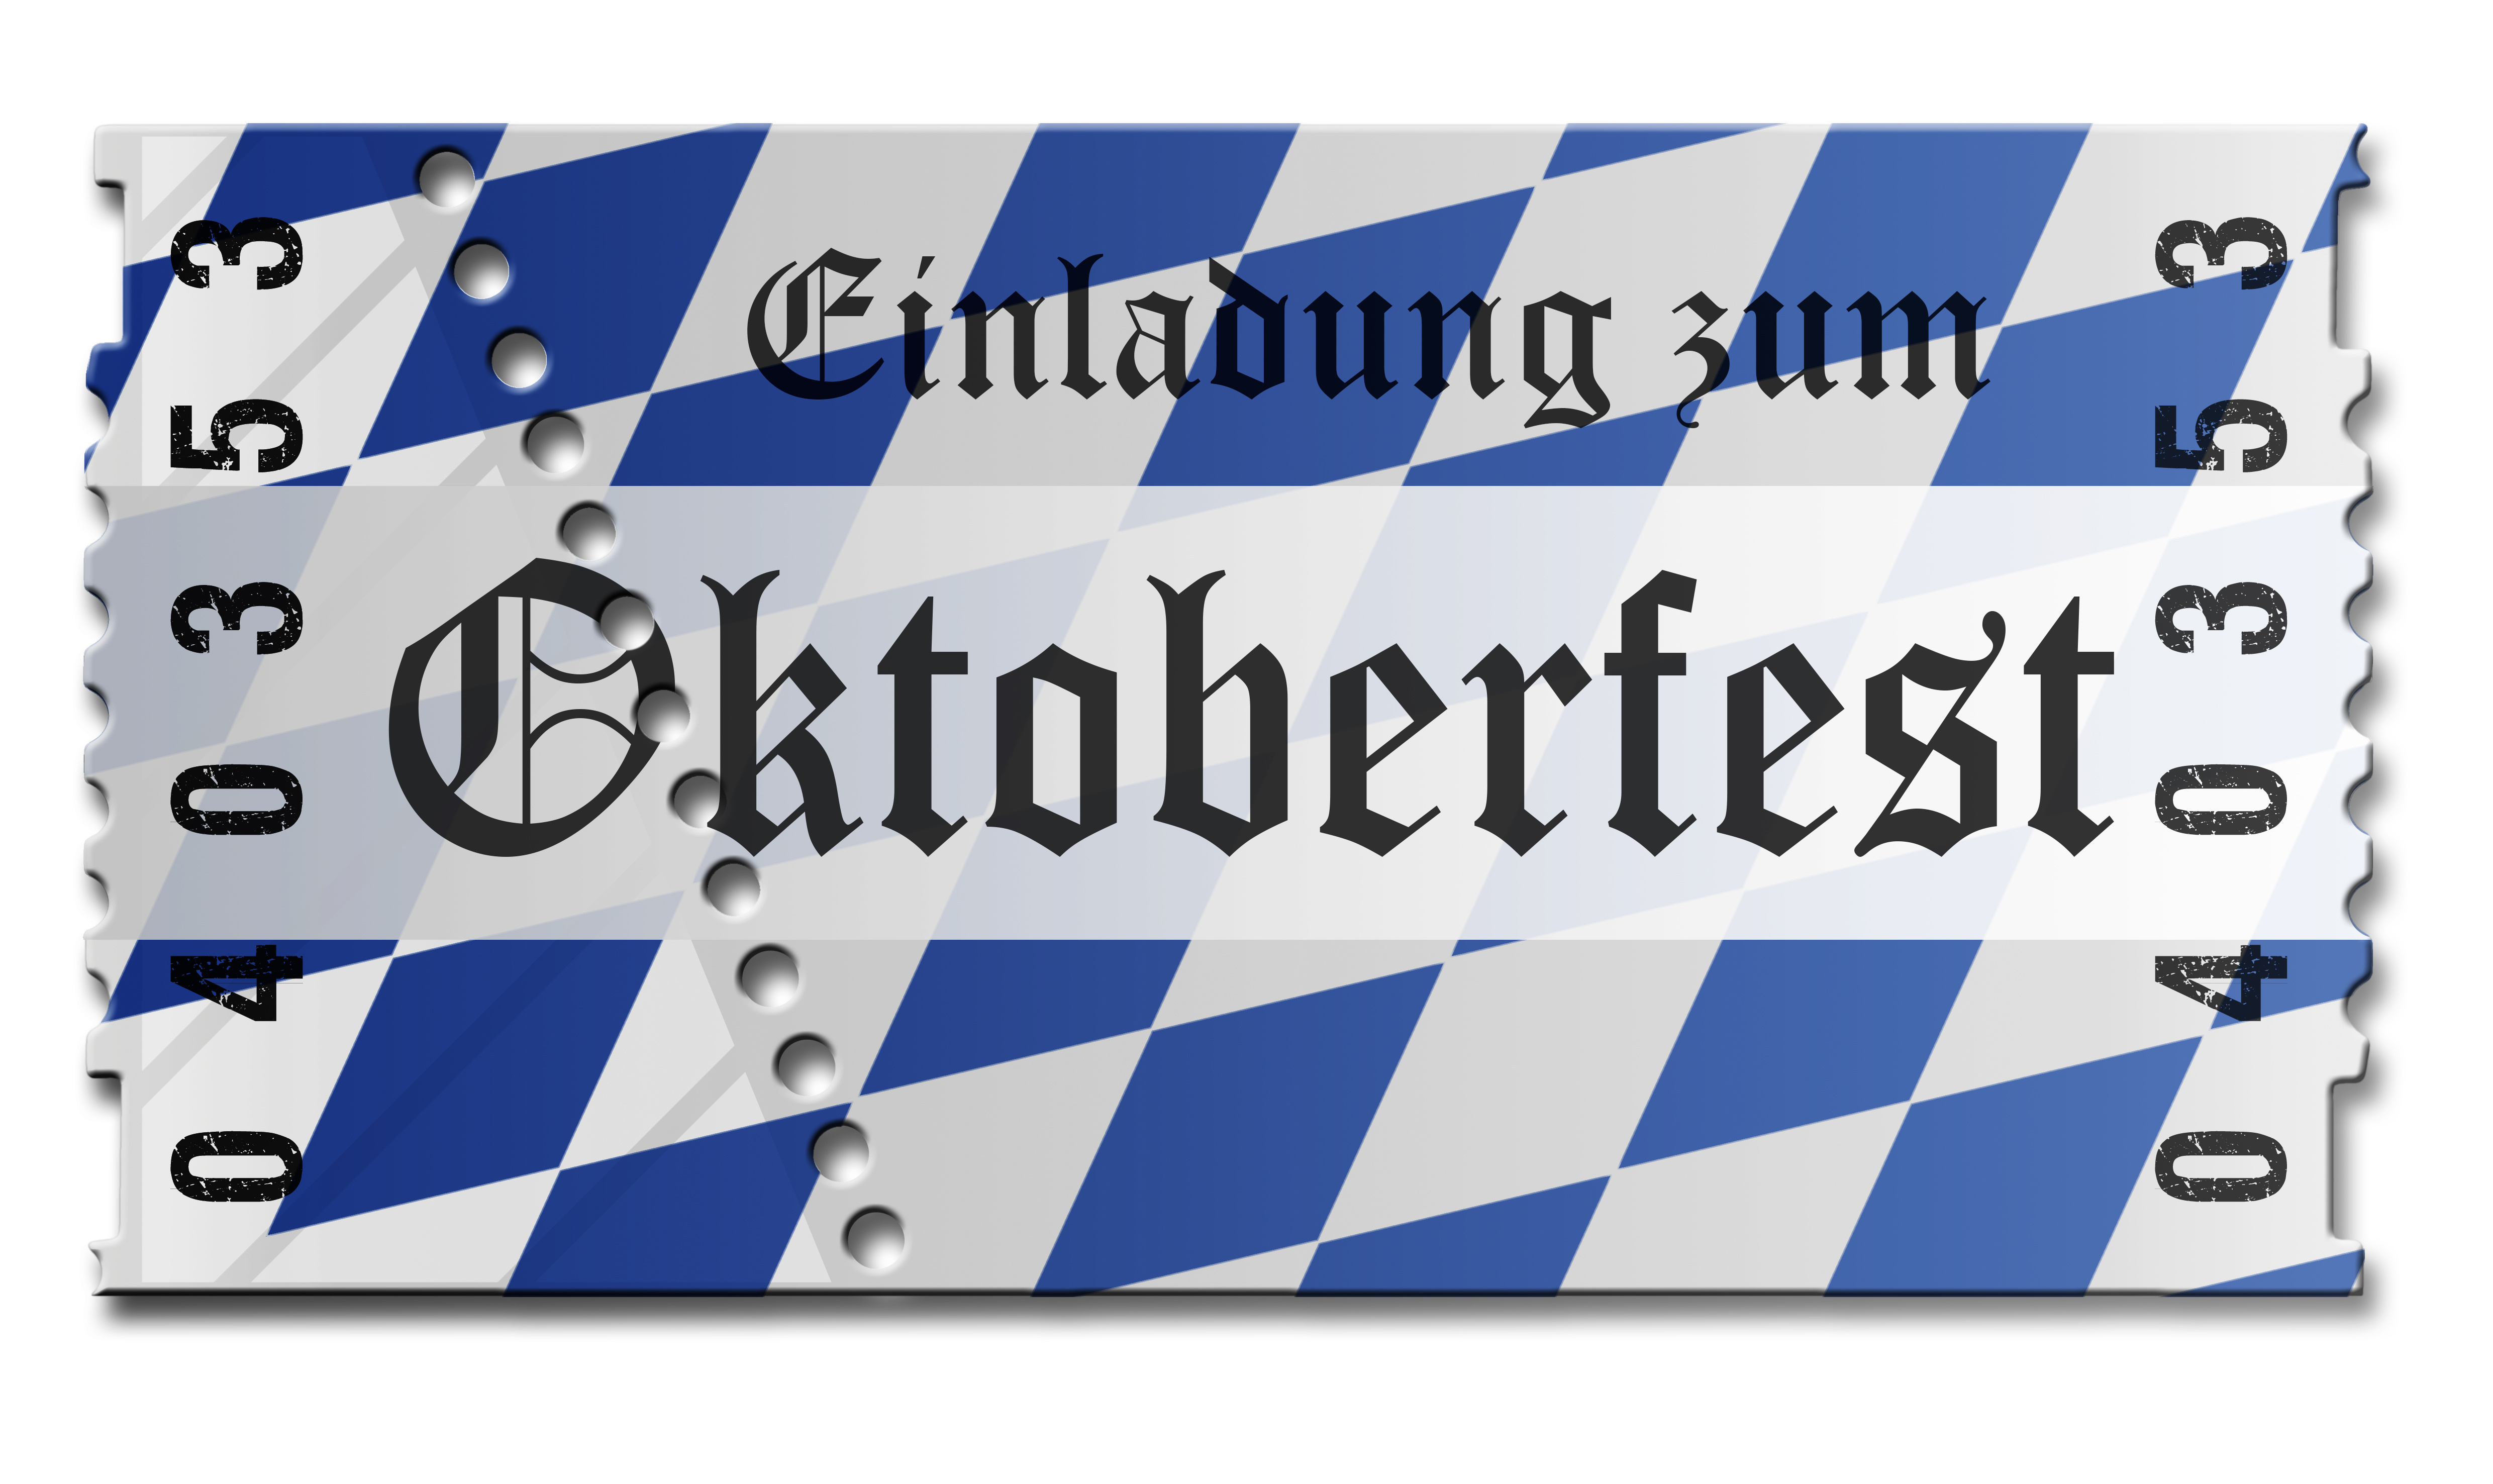 What Are You Using for Your Oktoberfest Ticketing App?